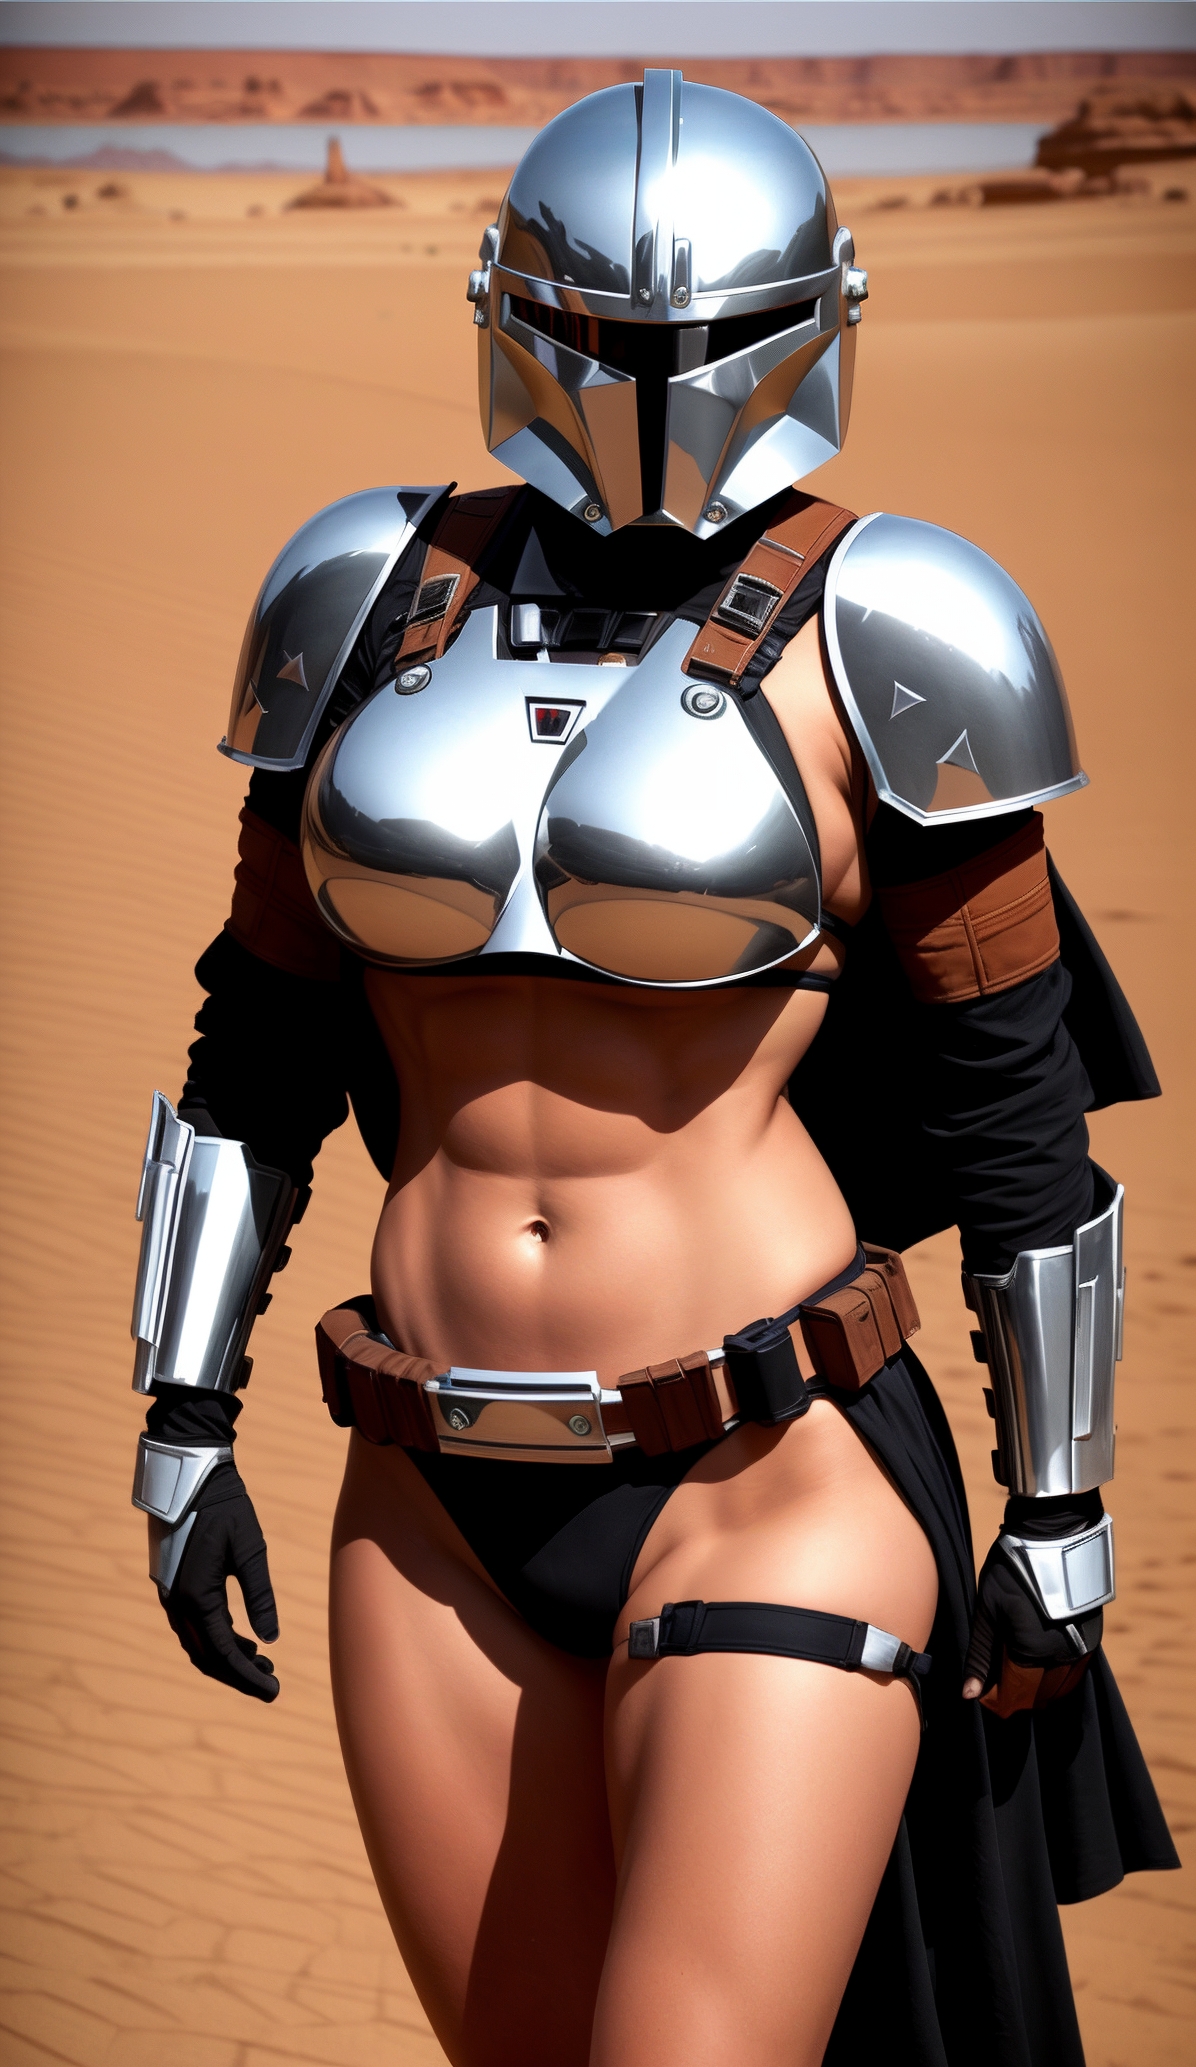 This is the way Mandalorian Starwars Muscular Girl 3d Porn 3d Girl 3dnsfw 3dxgirls Abs Sexy Hot Bimbo Huge Boobs Huge Tits Muscles Musclegirl Pinup Perfect Body Fuck Hard Sexyhot Sexy Ass Sexy Woman Fake Tits Lips Latex Flexible Smirking Big Tits Huge Ass Big Booty Booty Fit Fitness Thicc Mom Milf Mature Mature Woman Spread Legs Spread Thick Thighs Horny Face Short Hair Hardcore Curvy Big Ass Big boobs Big Breasts Big Butt Brown Eyes Cleavage Fishnet Stockings Fishnet Nipple Piercing Piercing Belly Button Piercing Leather Jacket Thighs Jewels Pawg Ass Red head Tribal Weapon Armor Nude Boobs Pregnant Big Balls Big Nipples Lingerie Sexy Lingerie Womb Tattoo Face Tattoo Slut Whore Bitch Comic Hotpants Shorts Long Hair Smile Blonde Graffiti Splash Body Paint Paint Squatting Japanese Korean Asian Priestess Nun Chrome